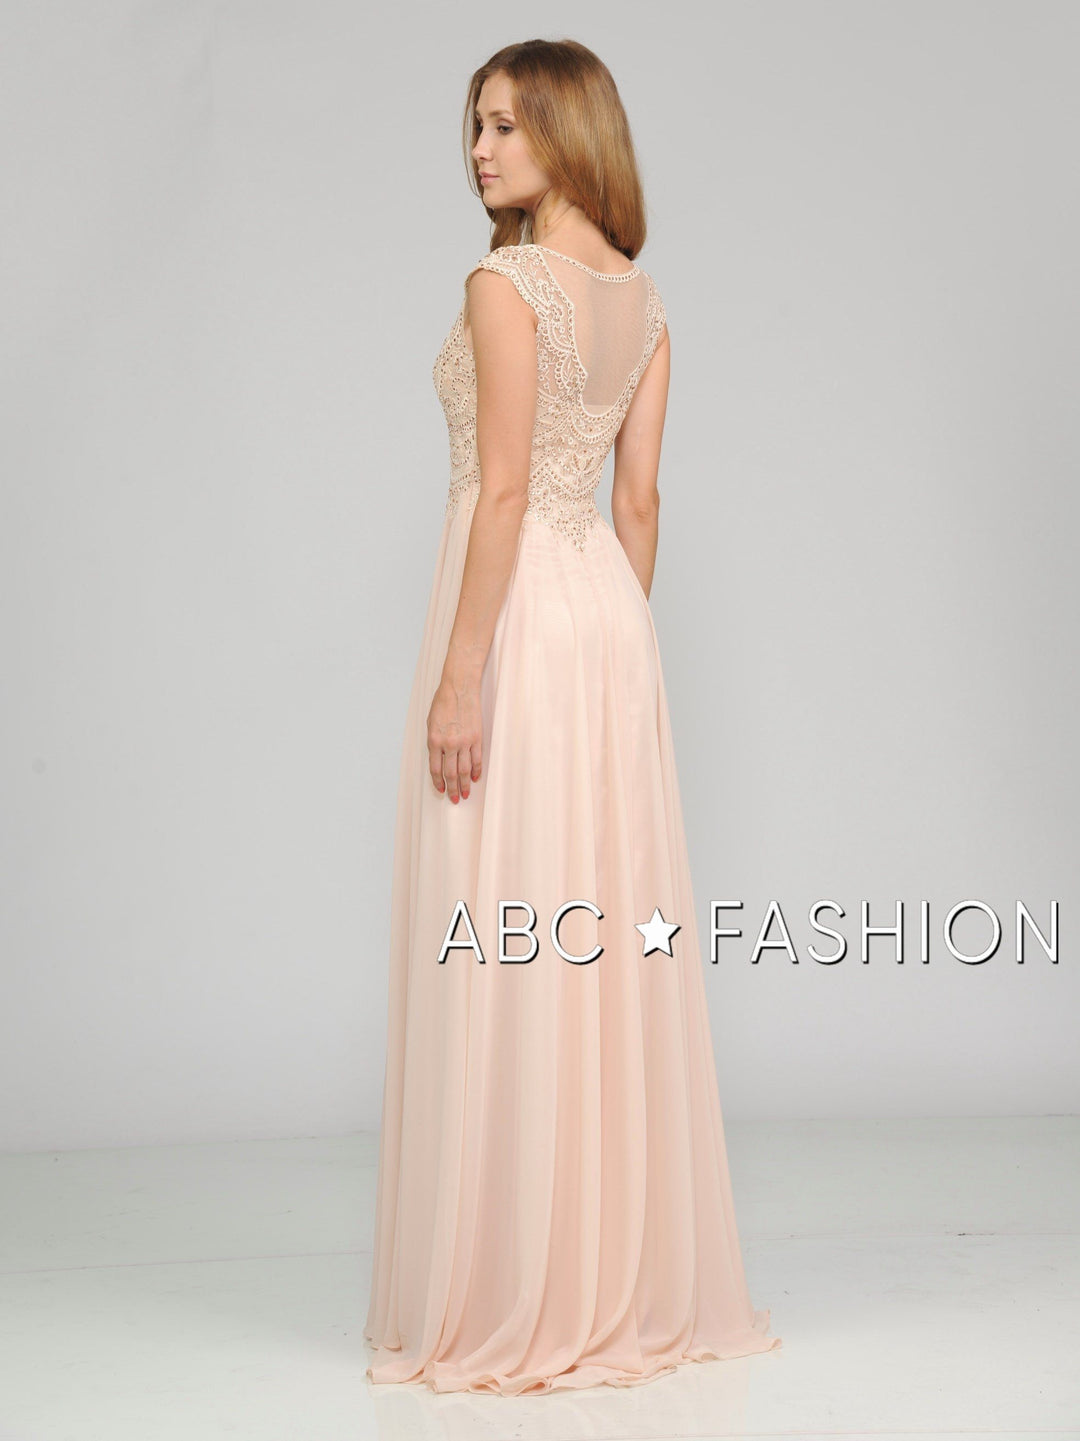 Long Embroidered Cap Sleeve Dress with Slit by Poly USA 8254-Long Formal Dresses-ABC Fashion